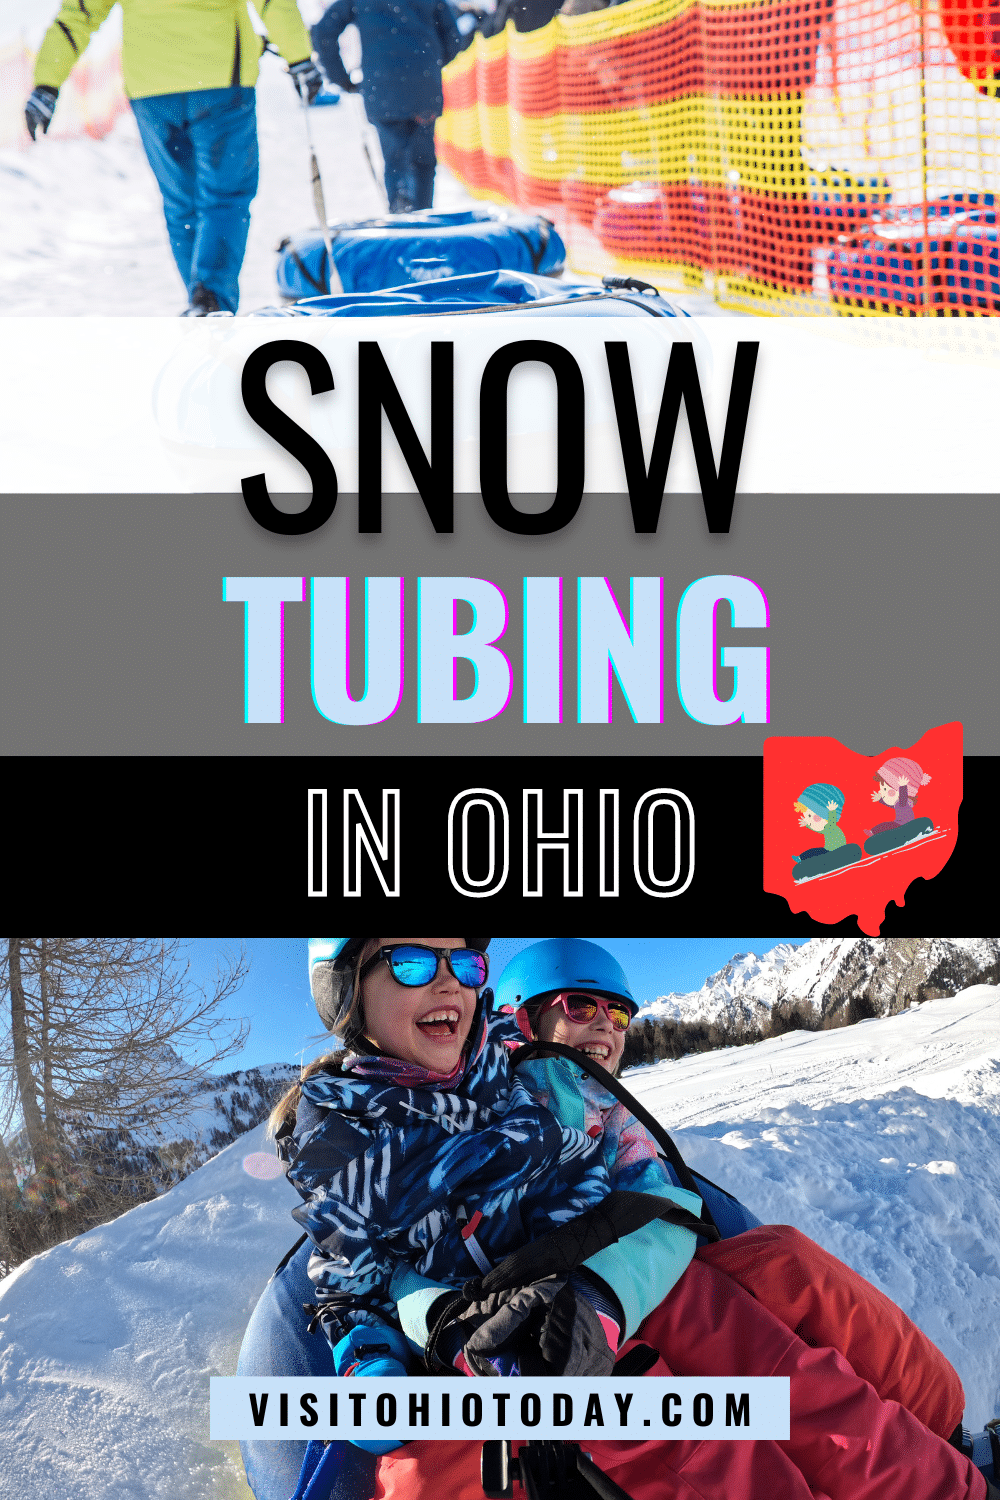 Image of a rubber tyre being pulled up a snowy hill. Underneath is an image of two children snow tubing down a hill. Text overlay says snow tubing in ohio